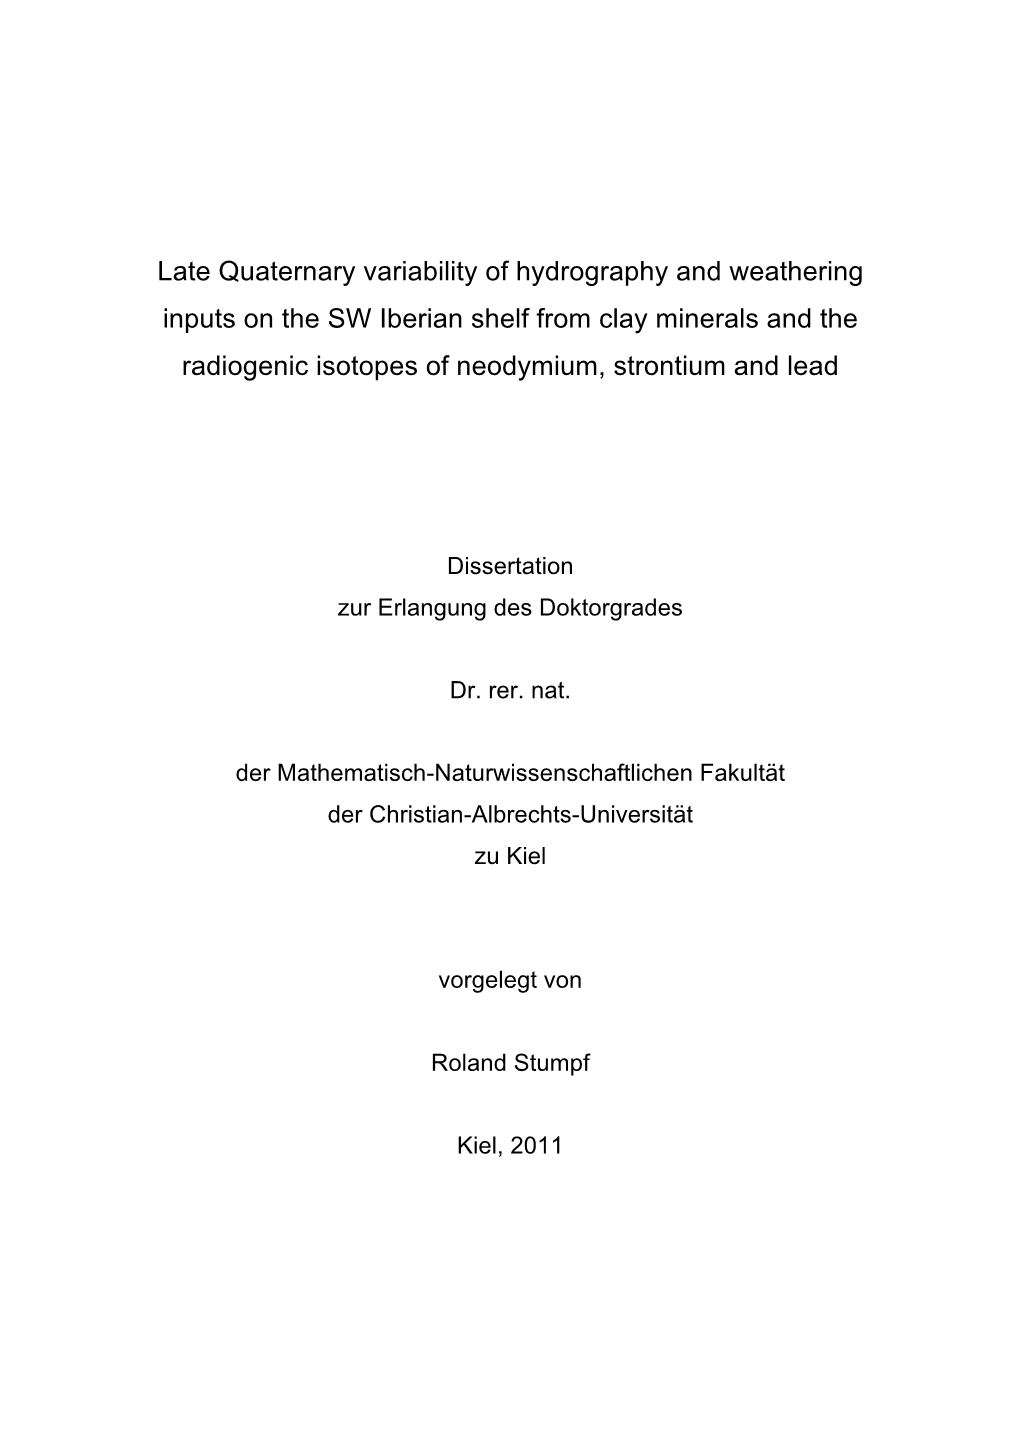 Late Quaternary Variability of Hydrography and Weathering Inputs on the SW Iberian Shelf from Clay Minerals and the Radiogenic I